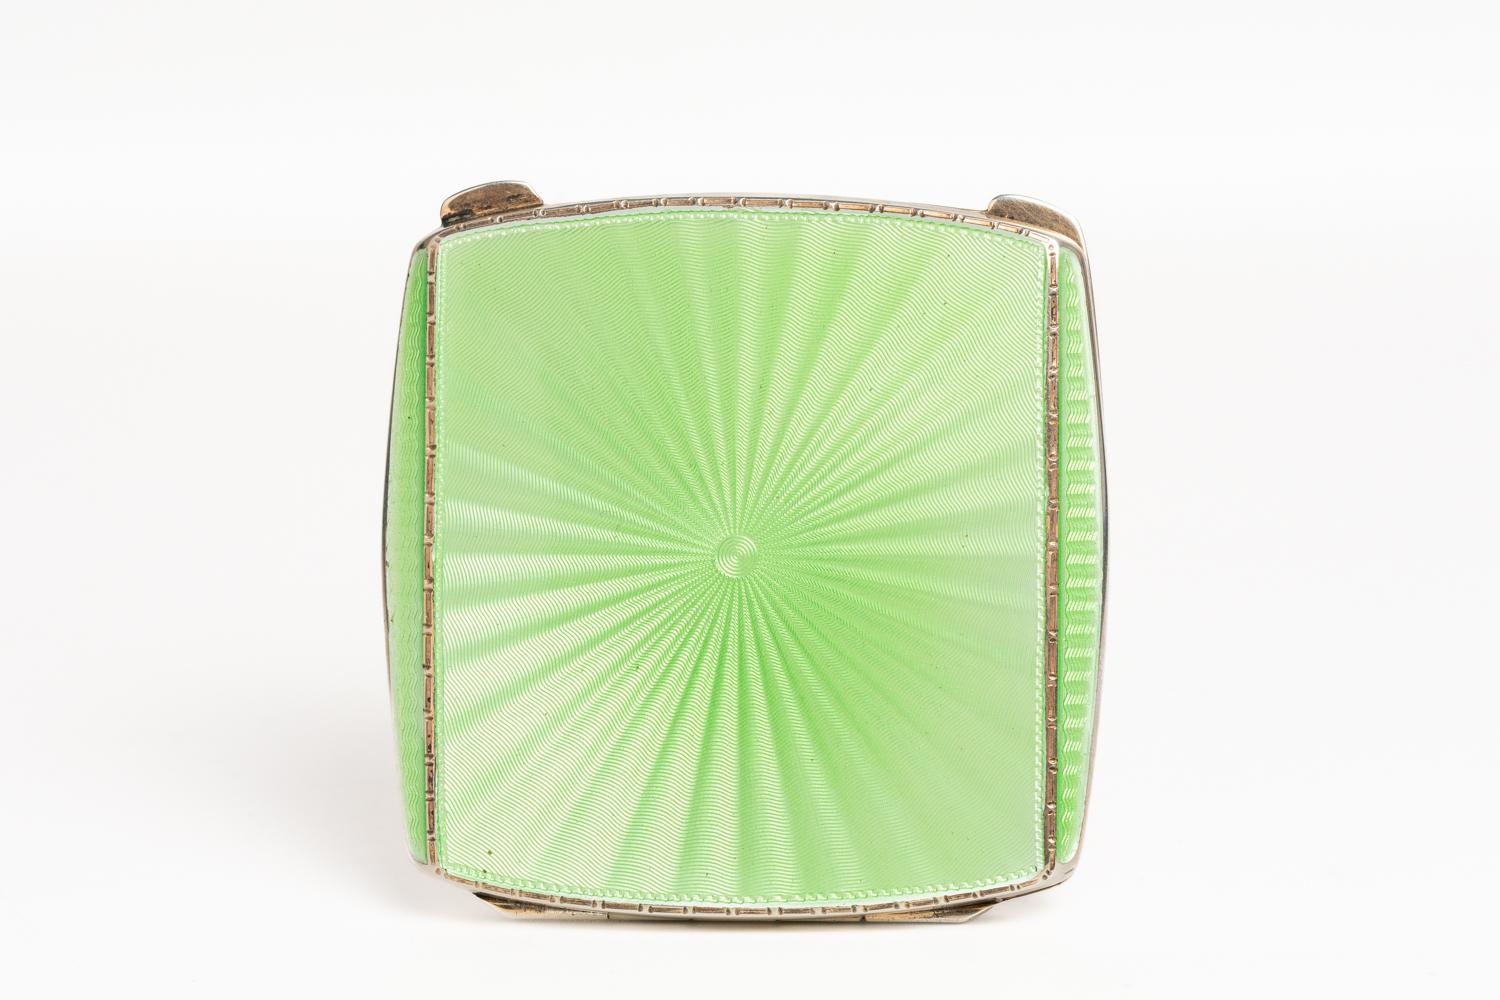 This fine and rare Art Deco green pale guilloche enamel compact was made in Birmingham 1936 and bears the marks of Albert Carter. This square form compact is decorated with a sunburst design, made in a beautiful pale green coloured enamel with a